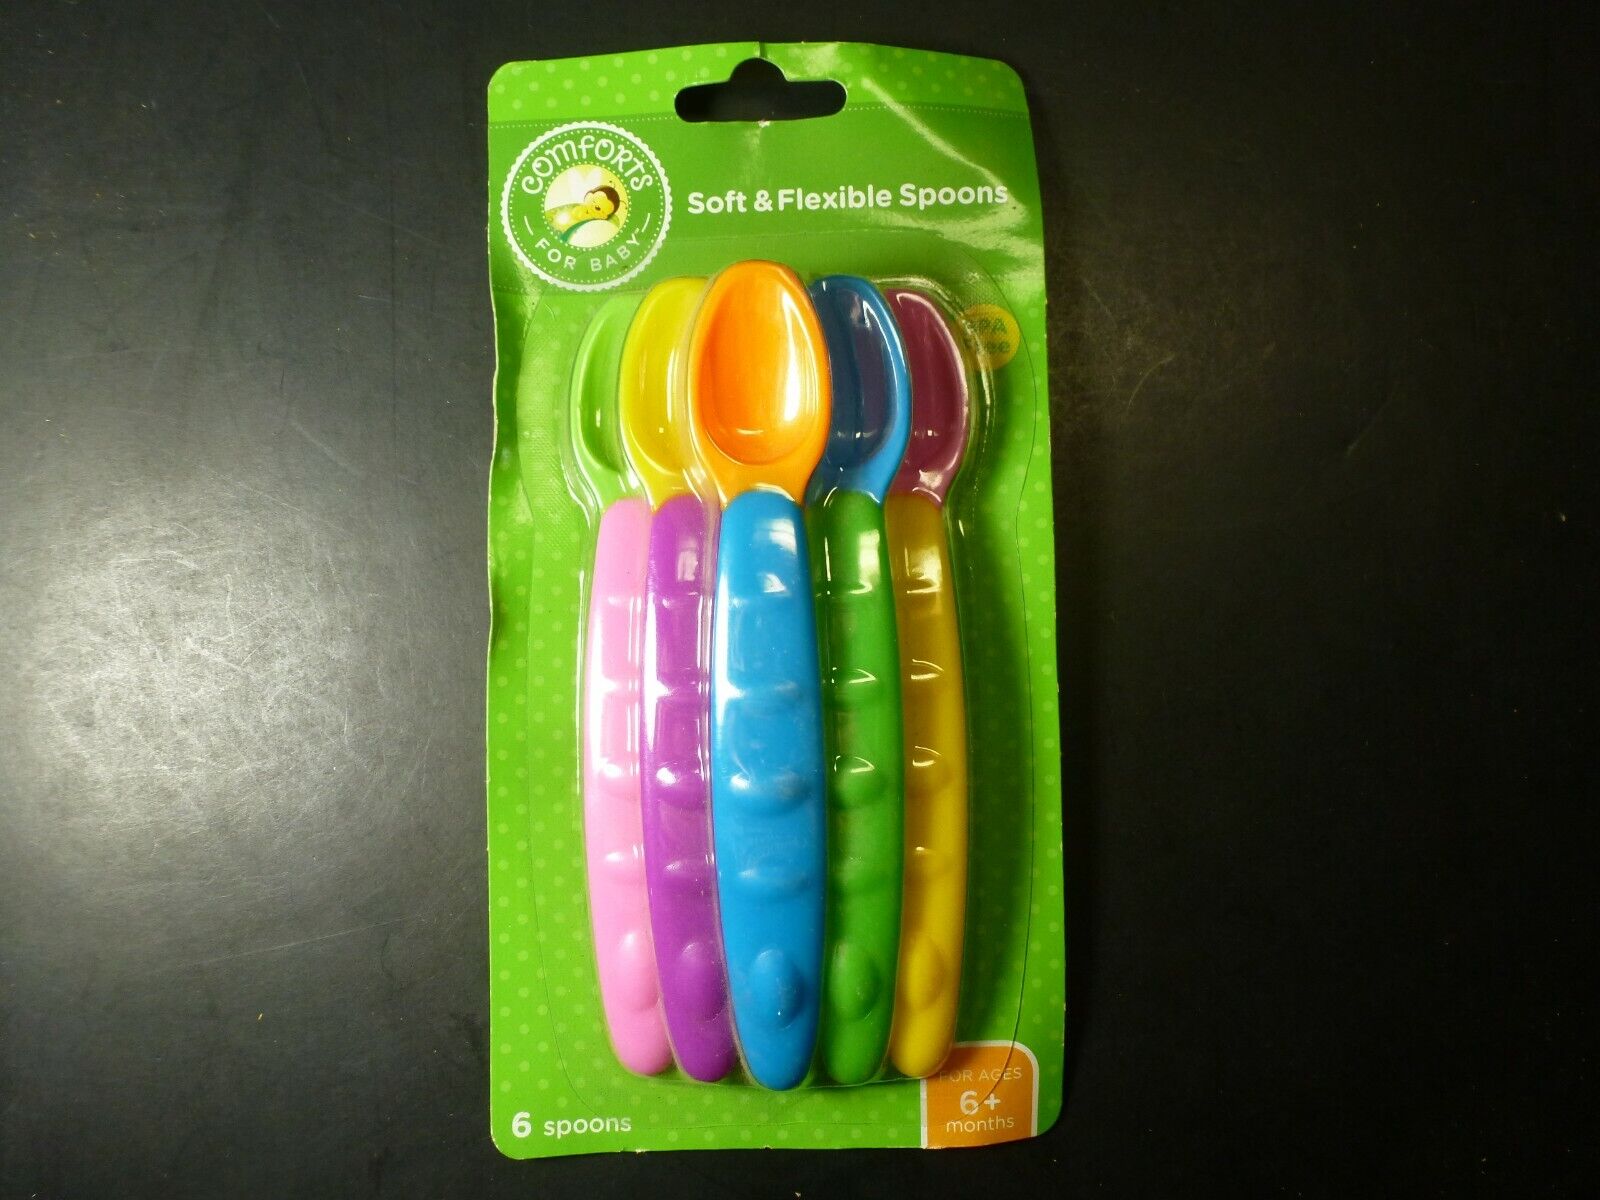 Comforts for Baby Package of 6 Comforts Soft & Flexible Spoons f